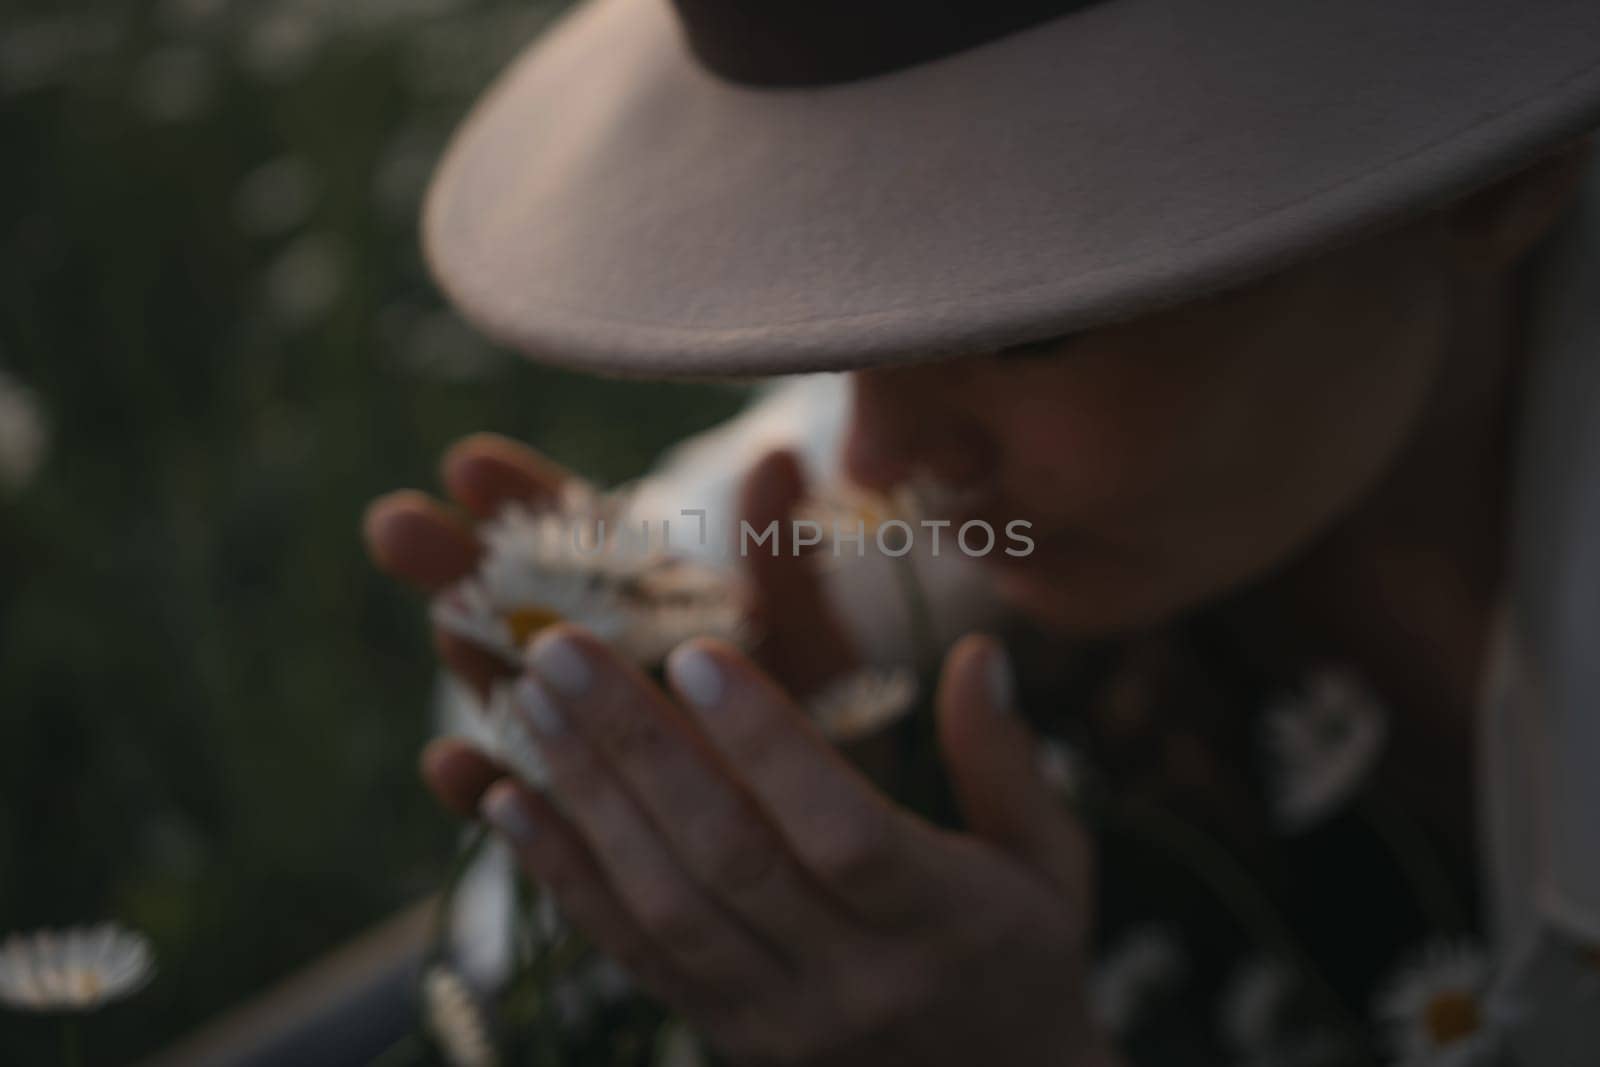 A woman wearing a hat is smelling flowers. The flowers are white and are scattered around her. The scene has a peaceful and calming mood